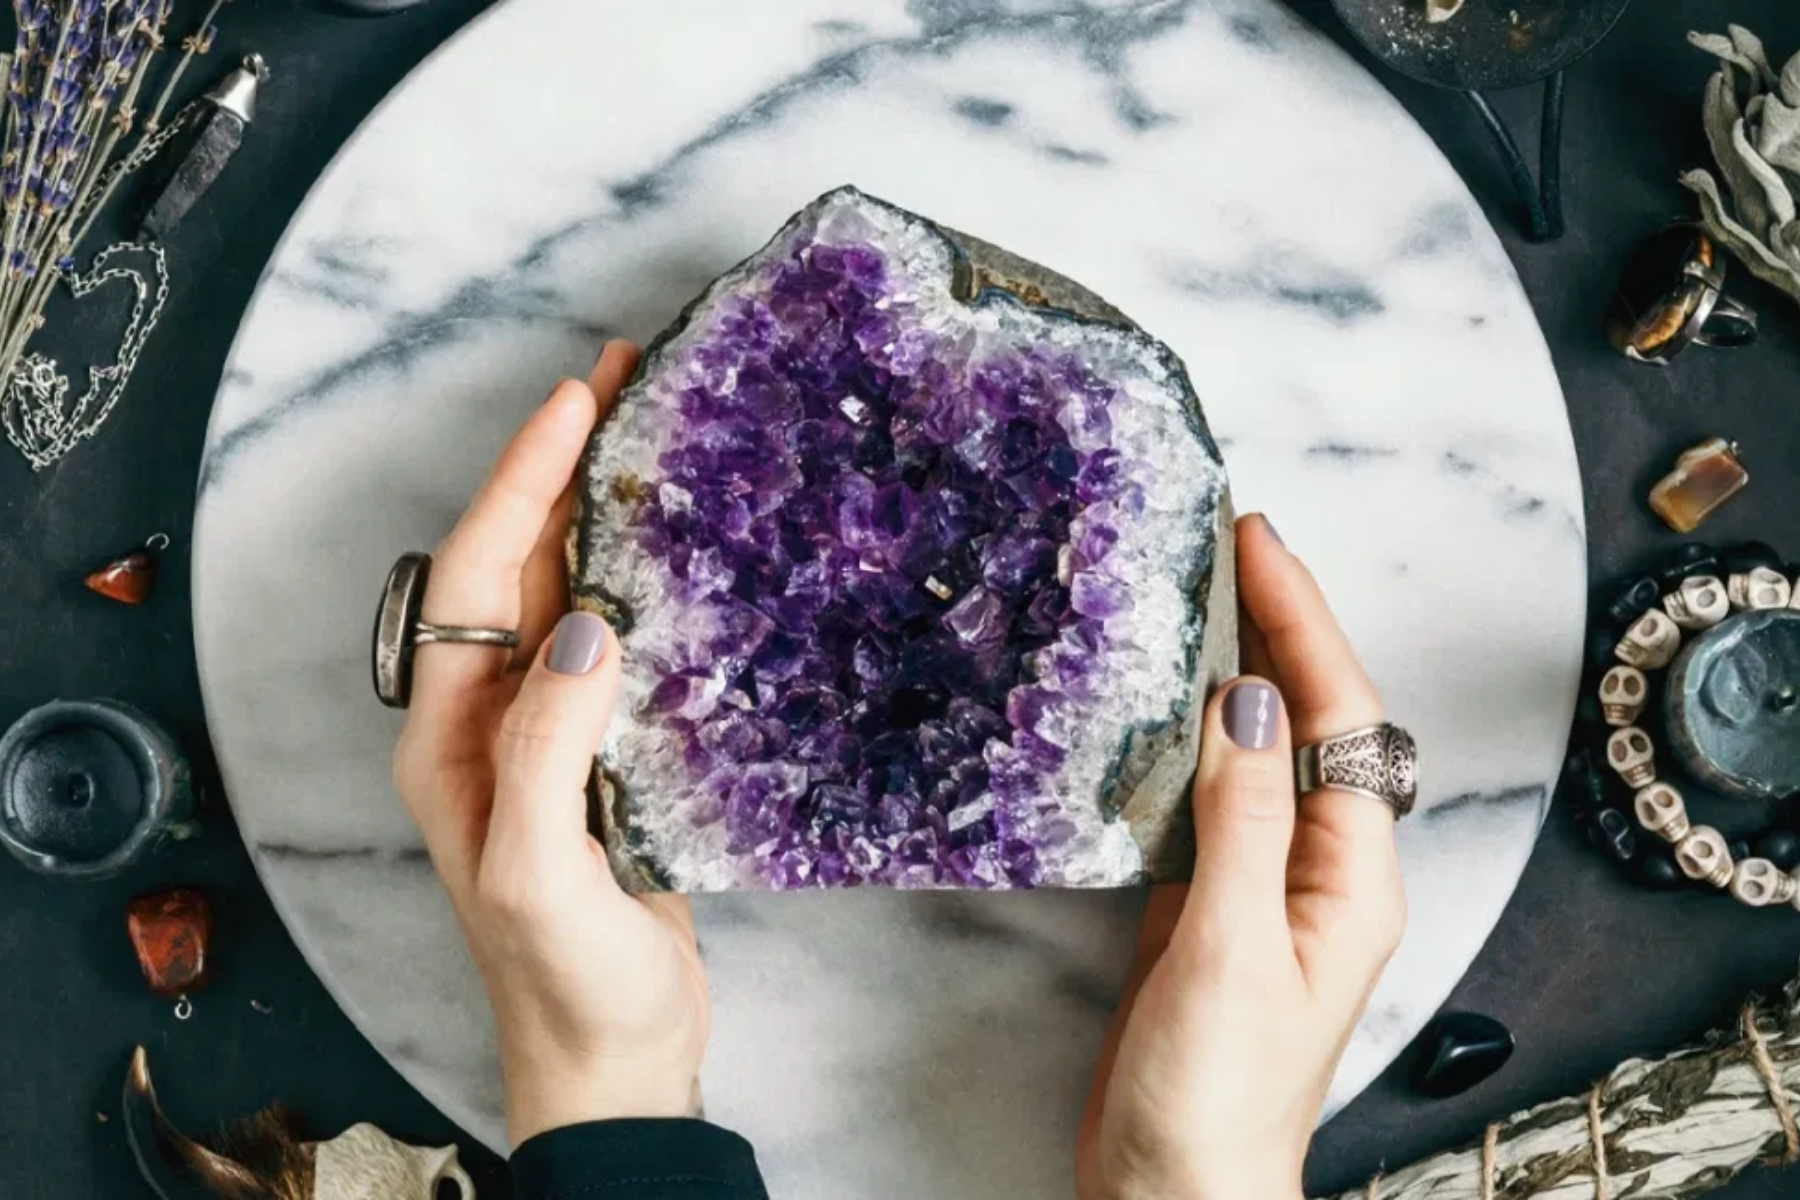 A white-purple amethyst stone is placed on a round white granite by a white hand